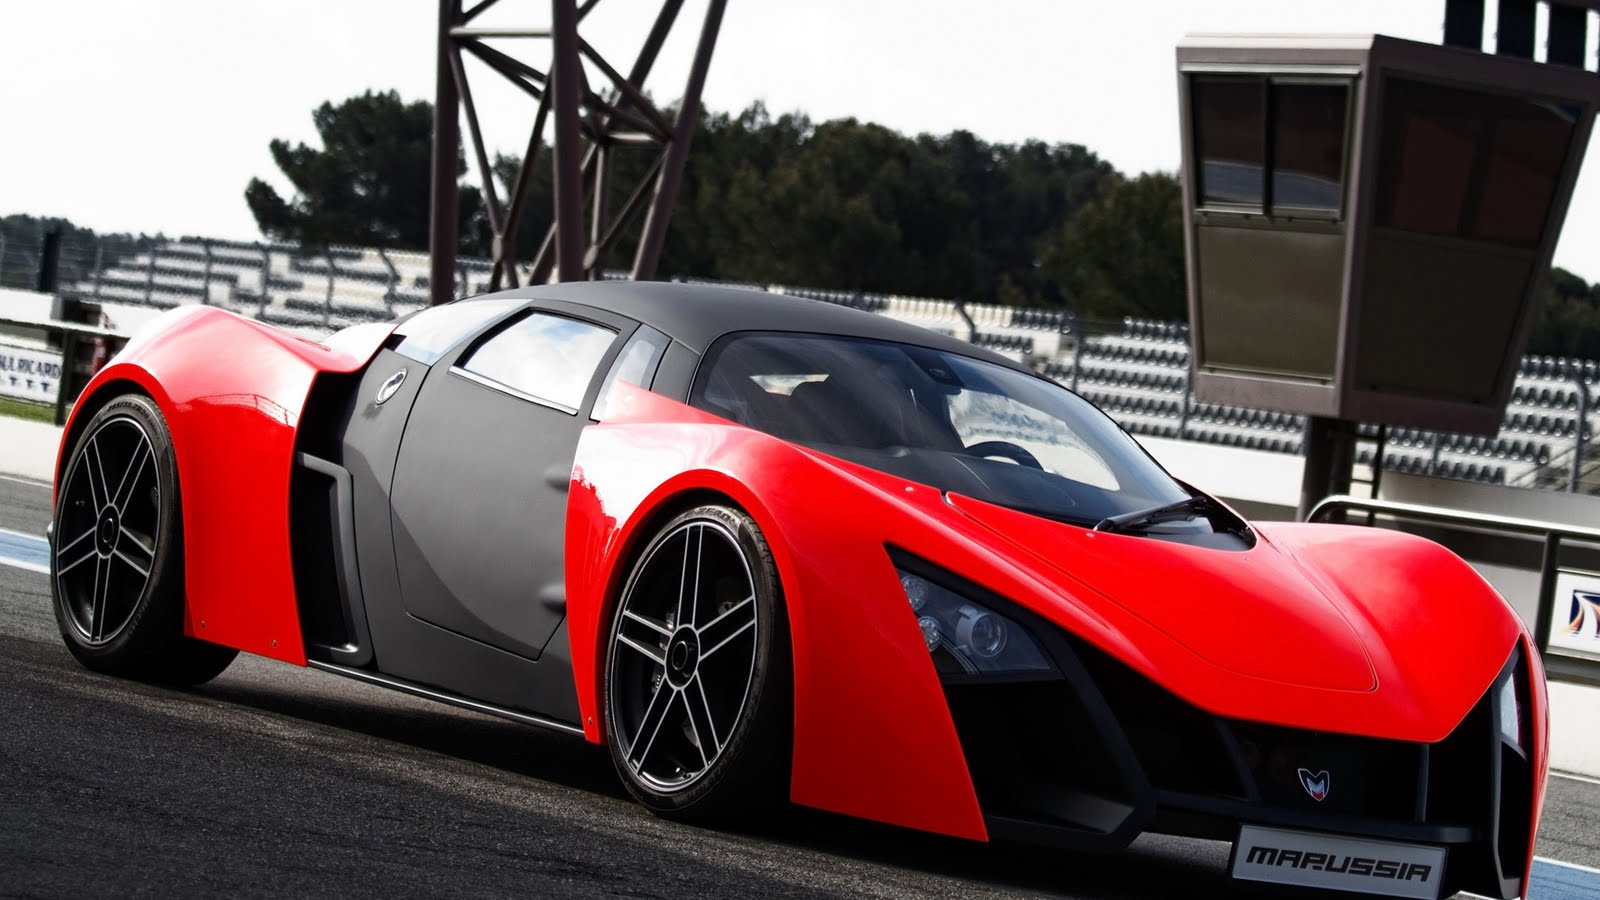 Super Cars 2013 HD Wallpapers HD Wallpapers 360